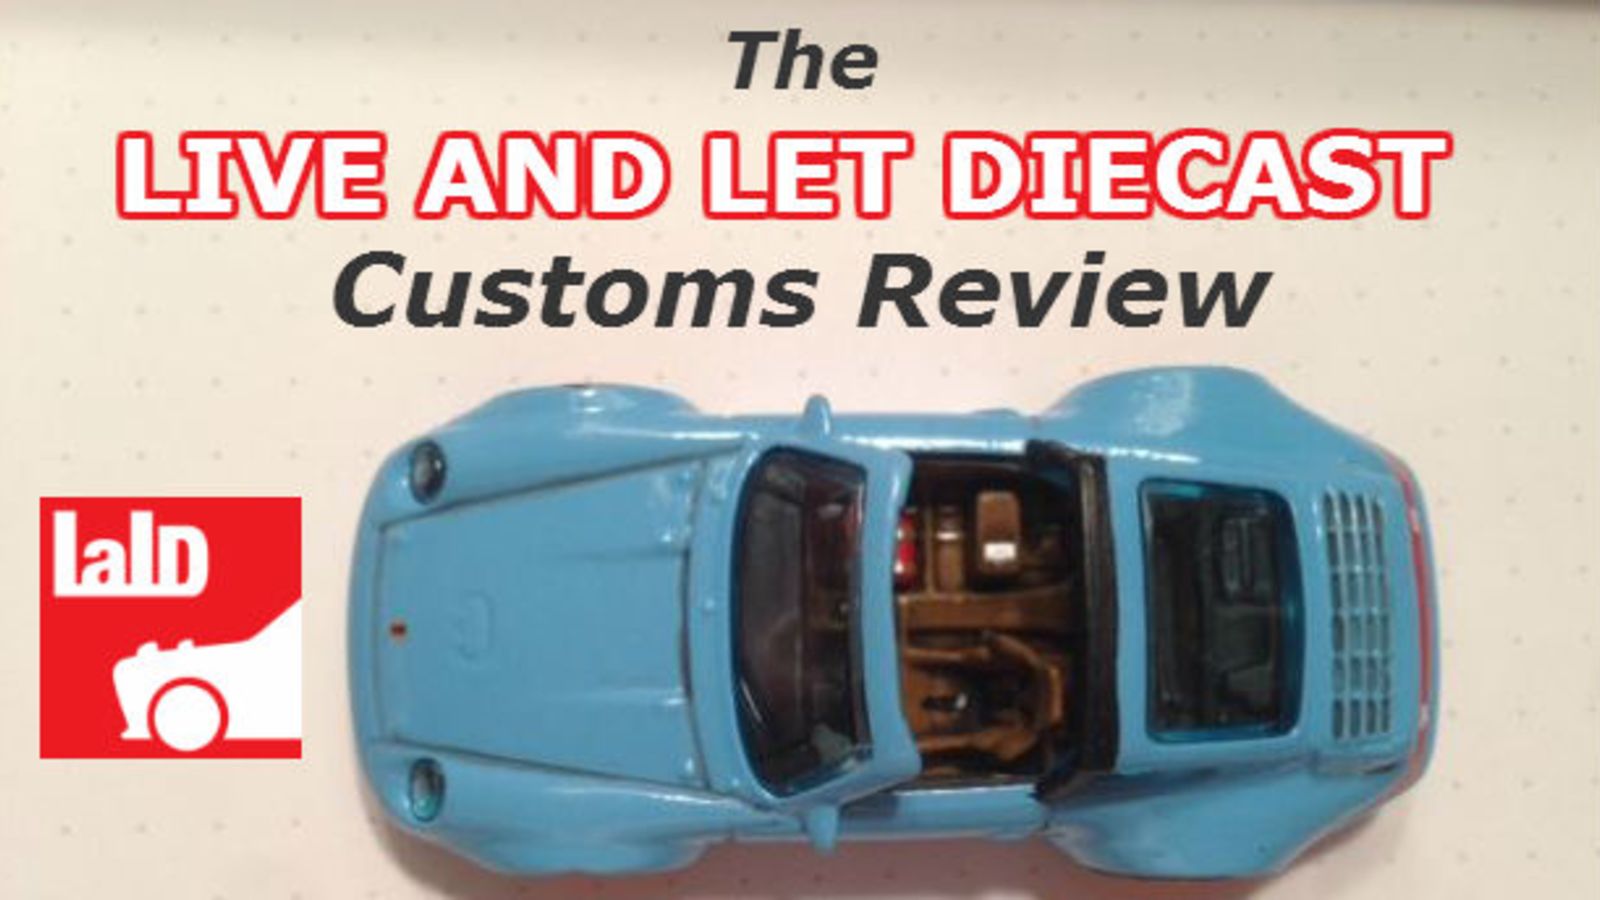 Illustration for article titled The Live and Let Diecast Customs Review - 10/16 - 10/27/2014